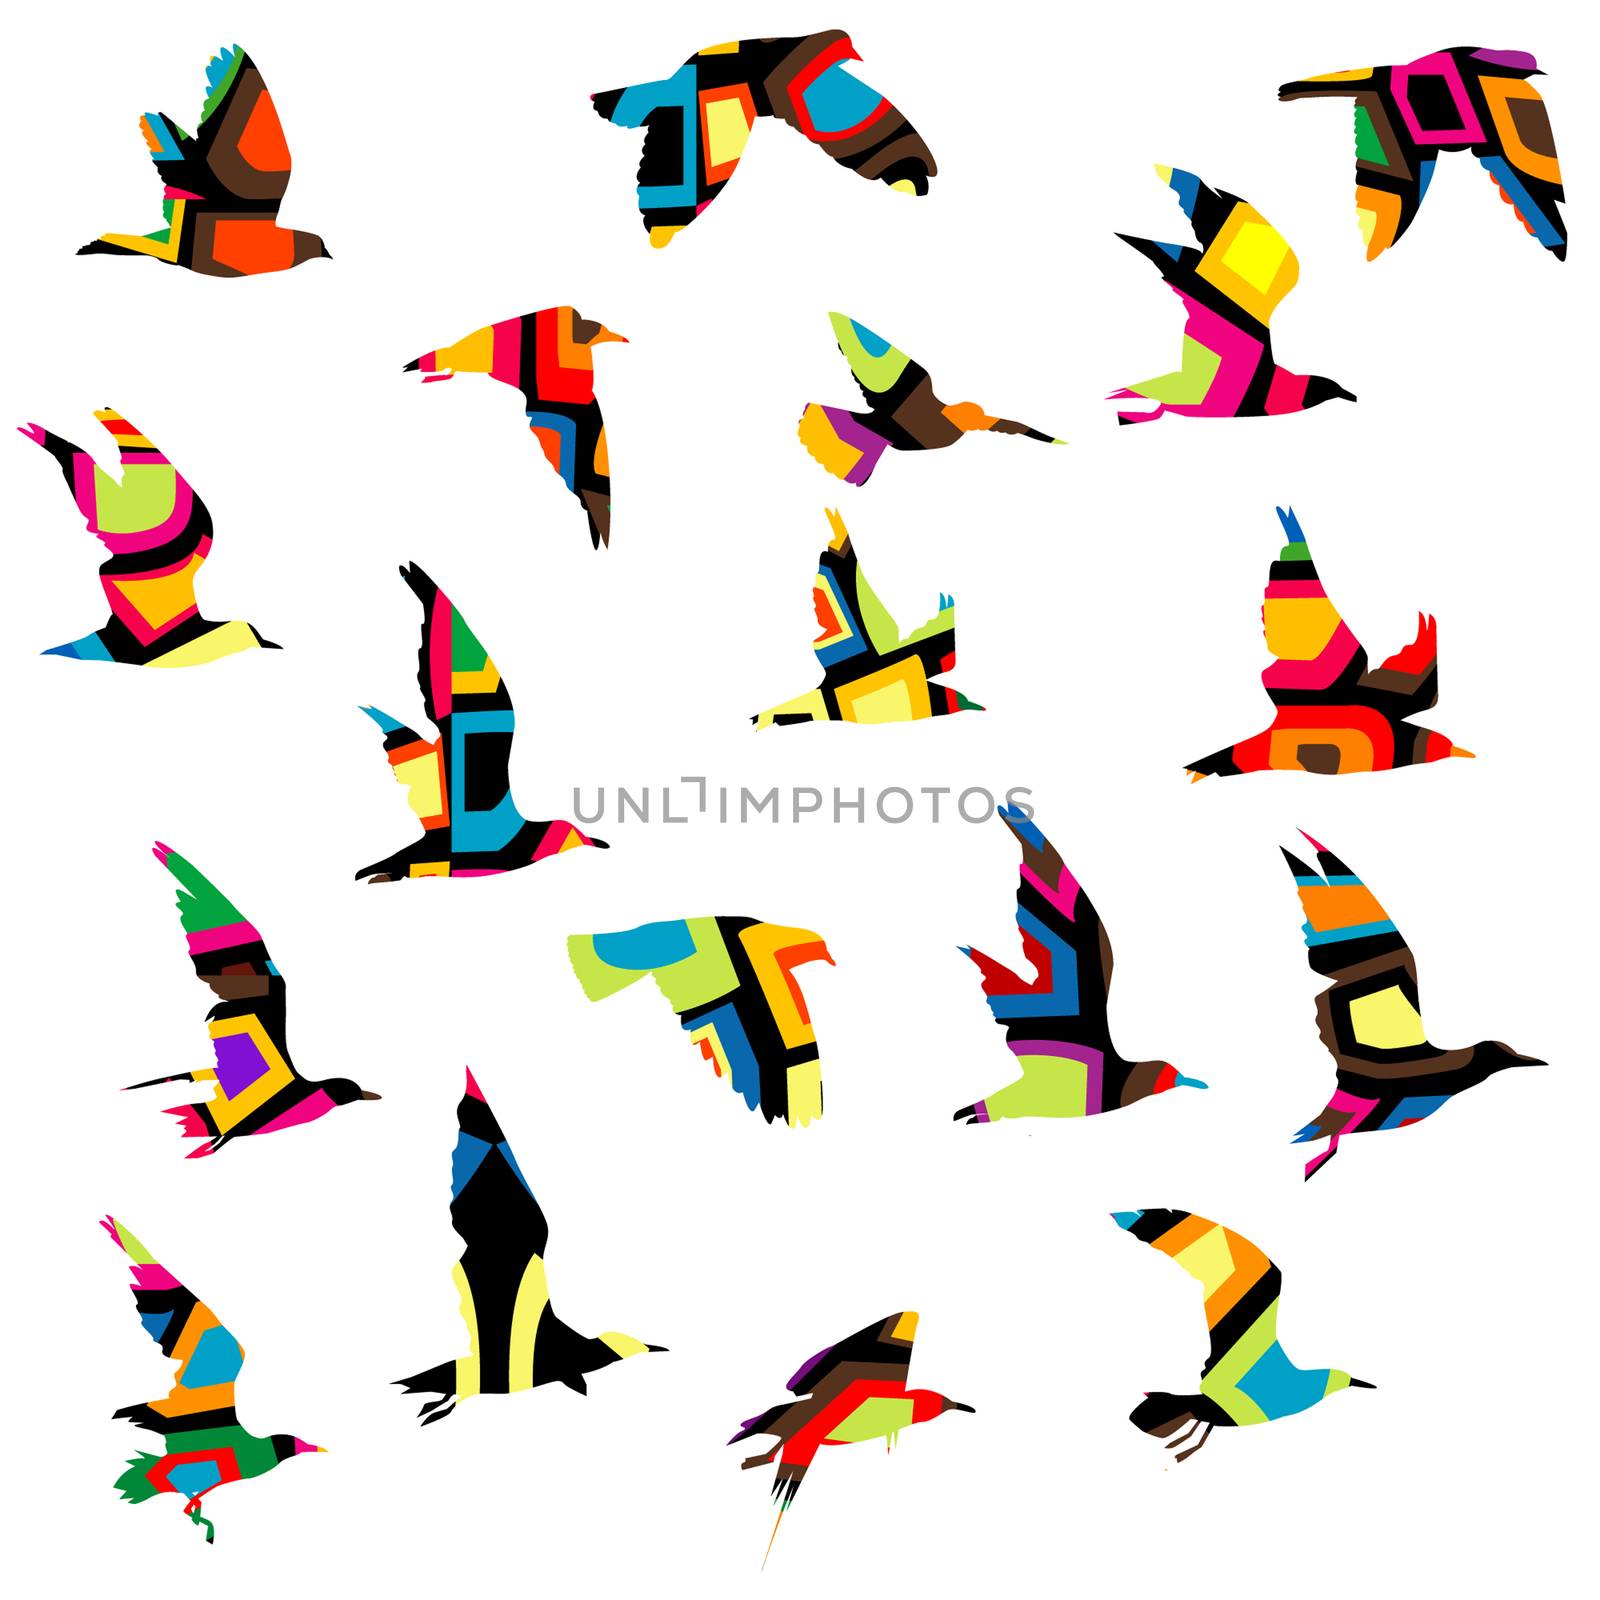 Colorful silhouettes of birds flying by hibrida13